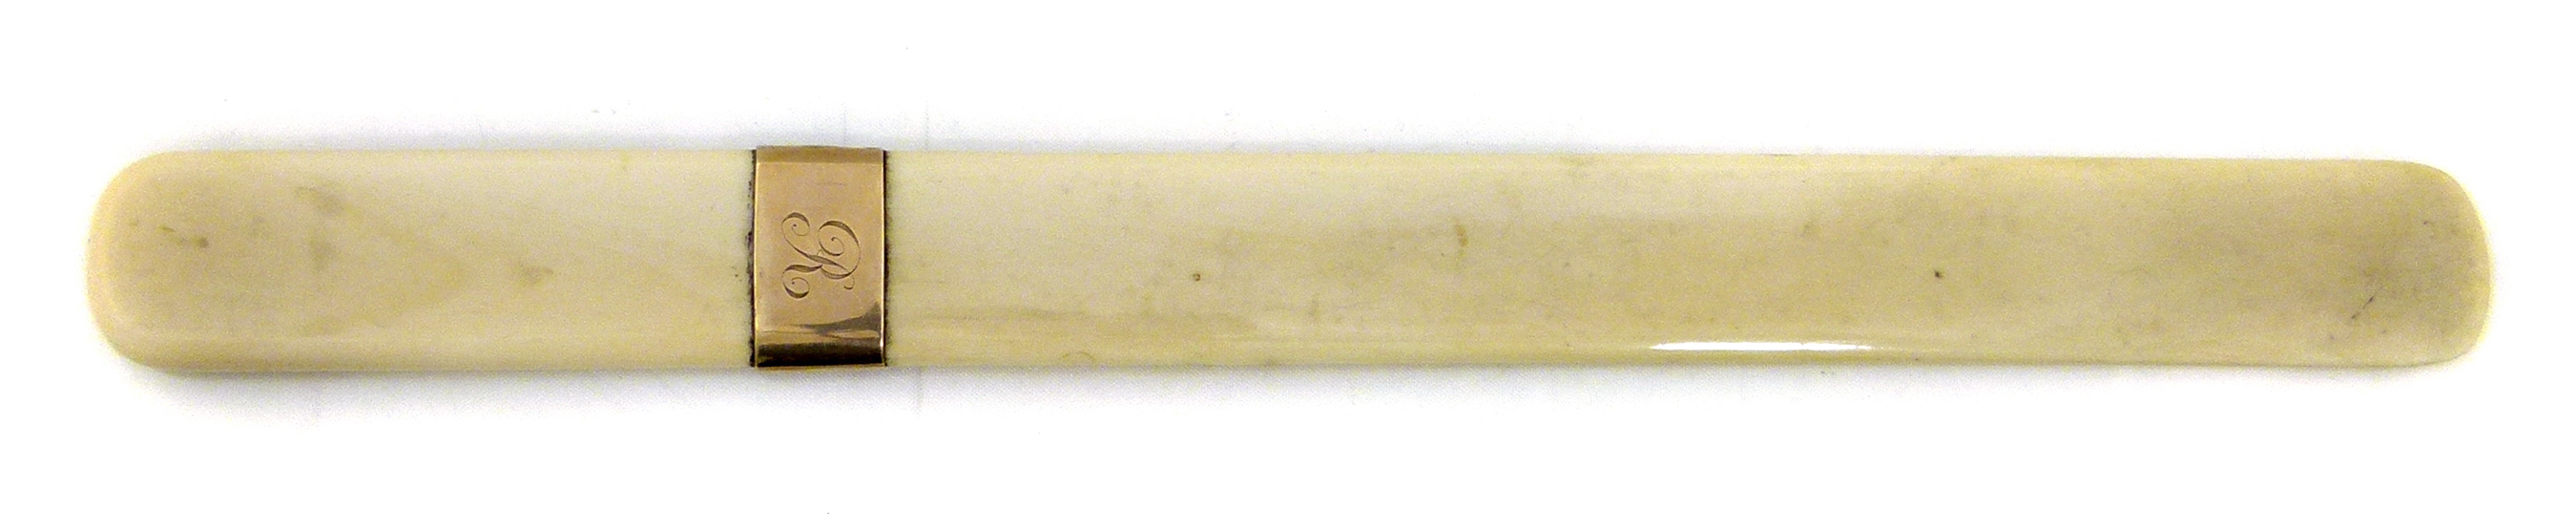 Ivory paper knife with an unmarked gold ferrule inscribed 1872 - 1922 , length 36.5cm.